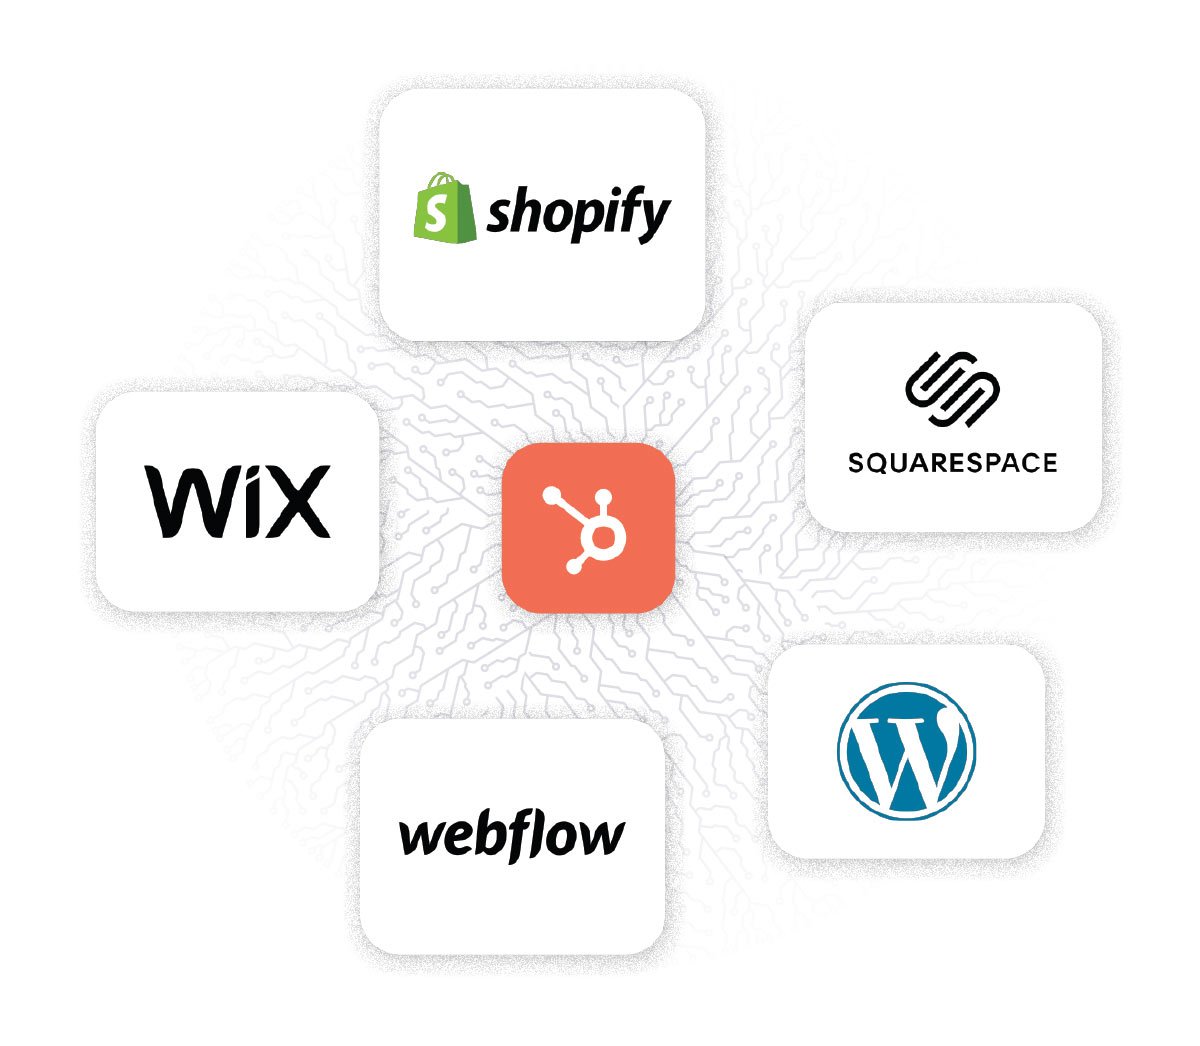 HubSpot Sprocket logo surrounded by other CMS logos including: Wix, Shopify, Squarespace, Webflow, Wordpress.